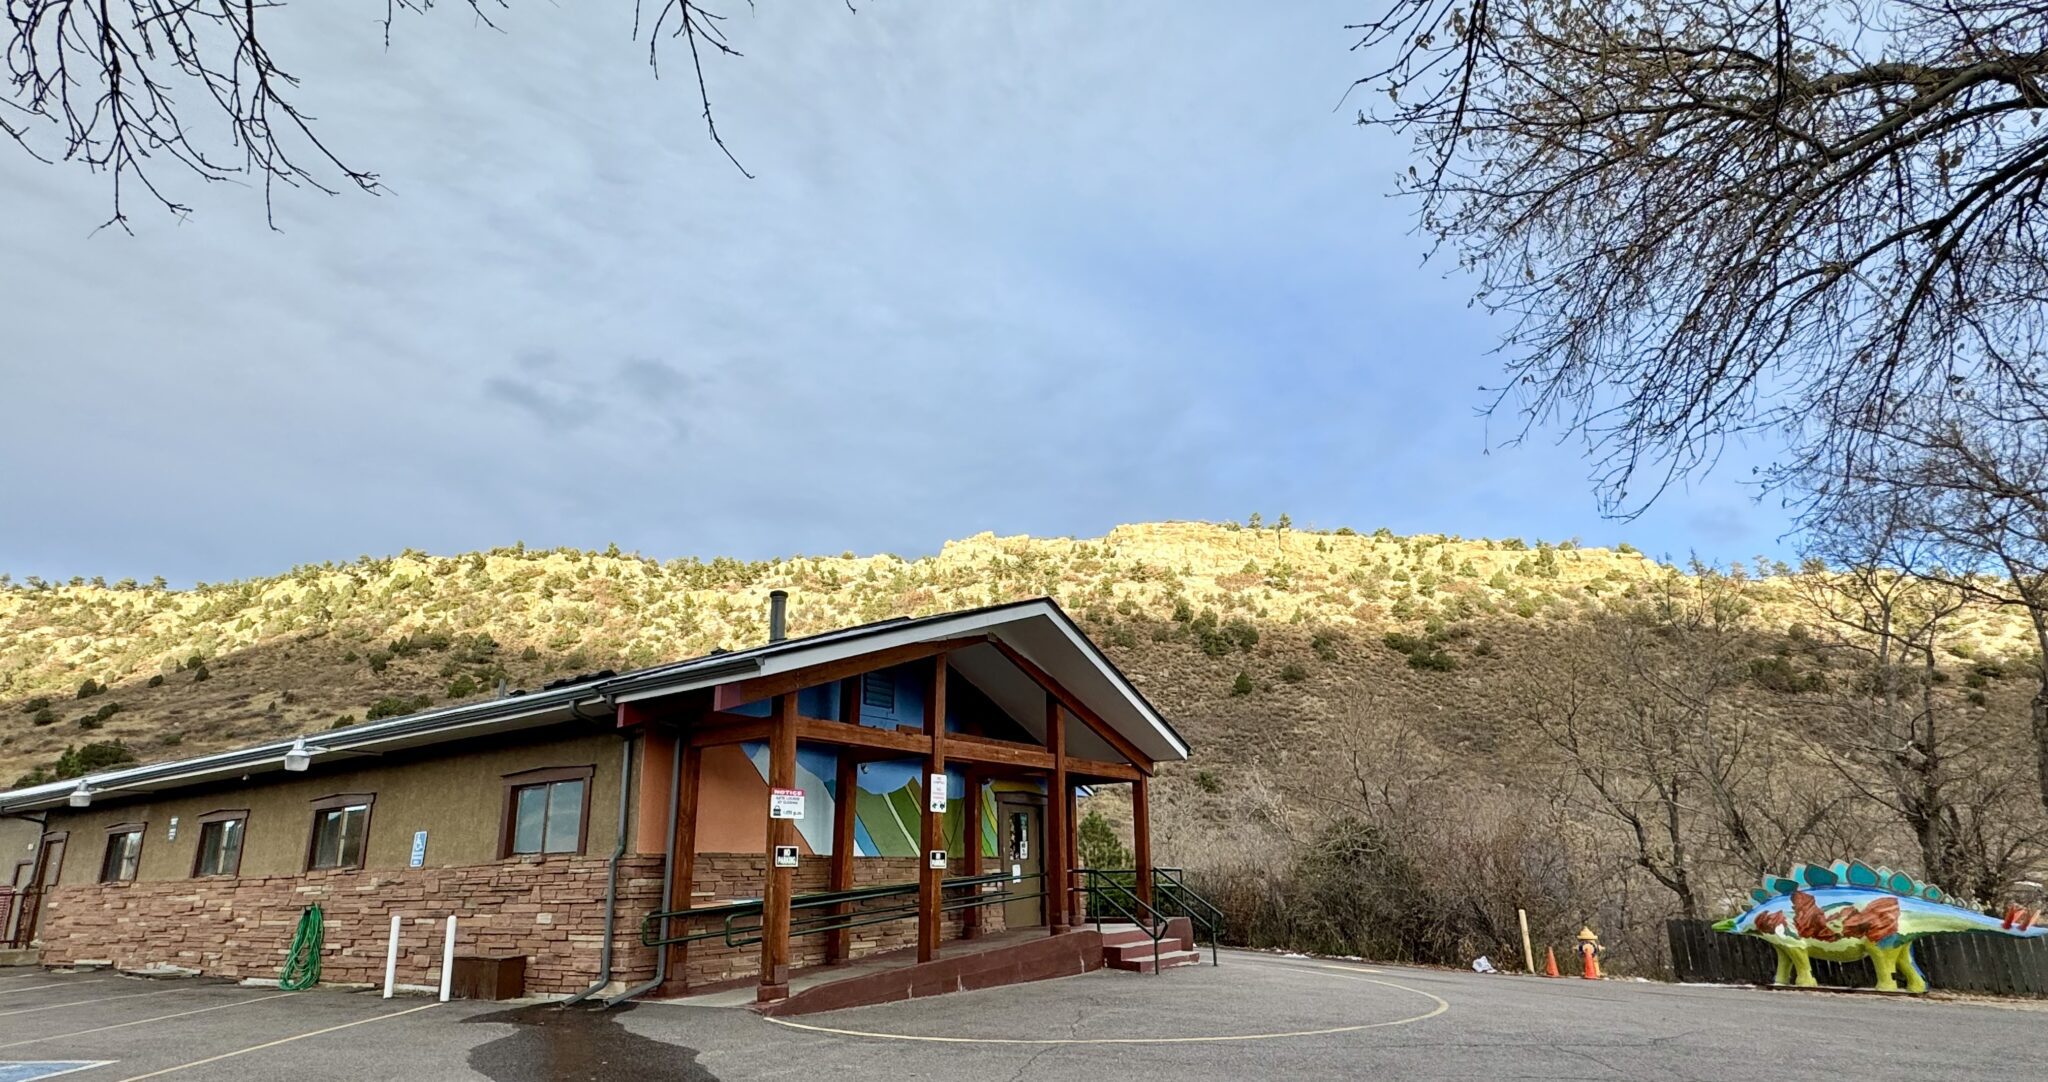 The Discovery Center at Dinosaur Ridge, to be renamed the Marin G. Lockley Discovery Center